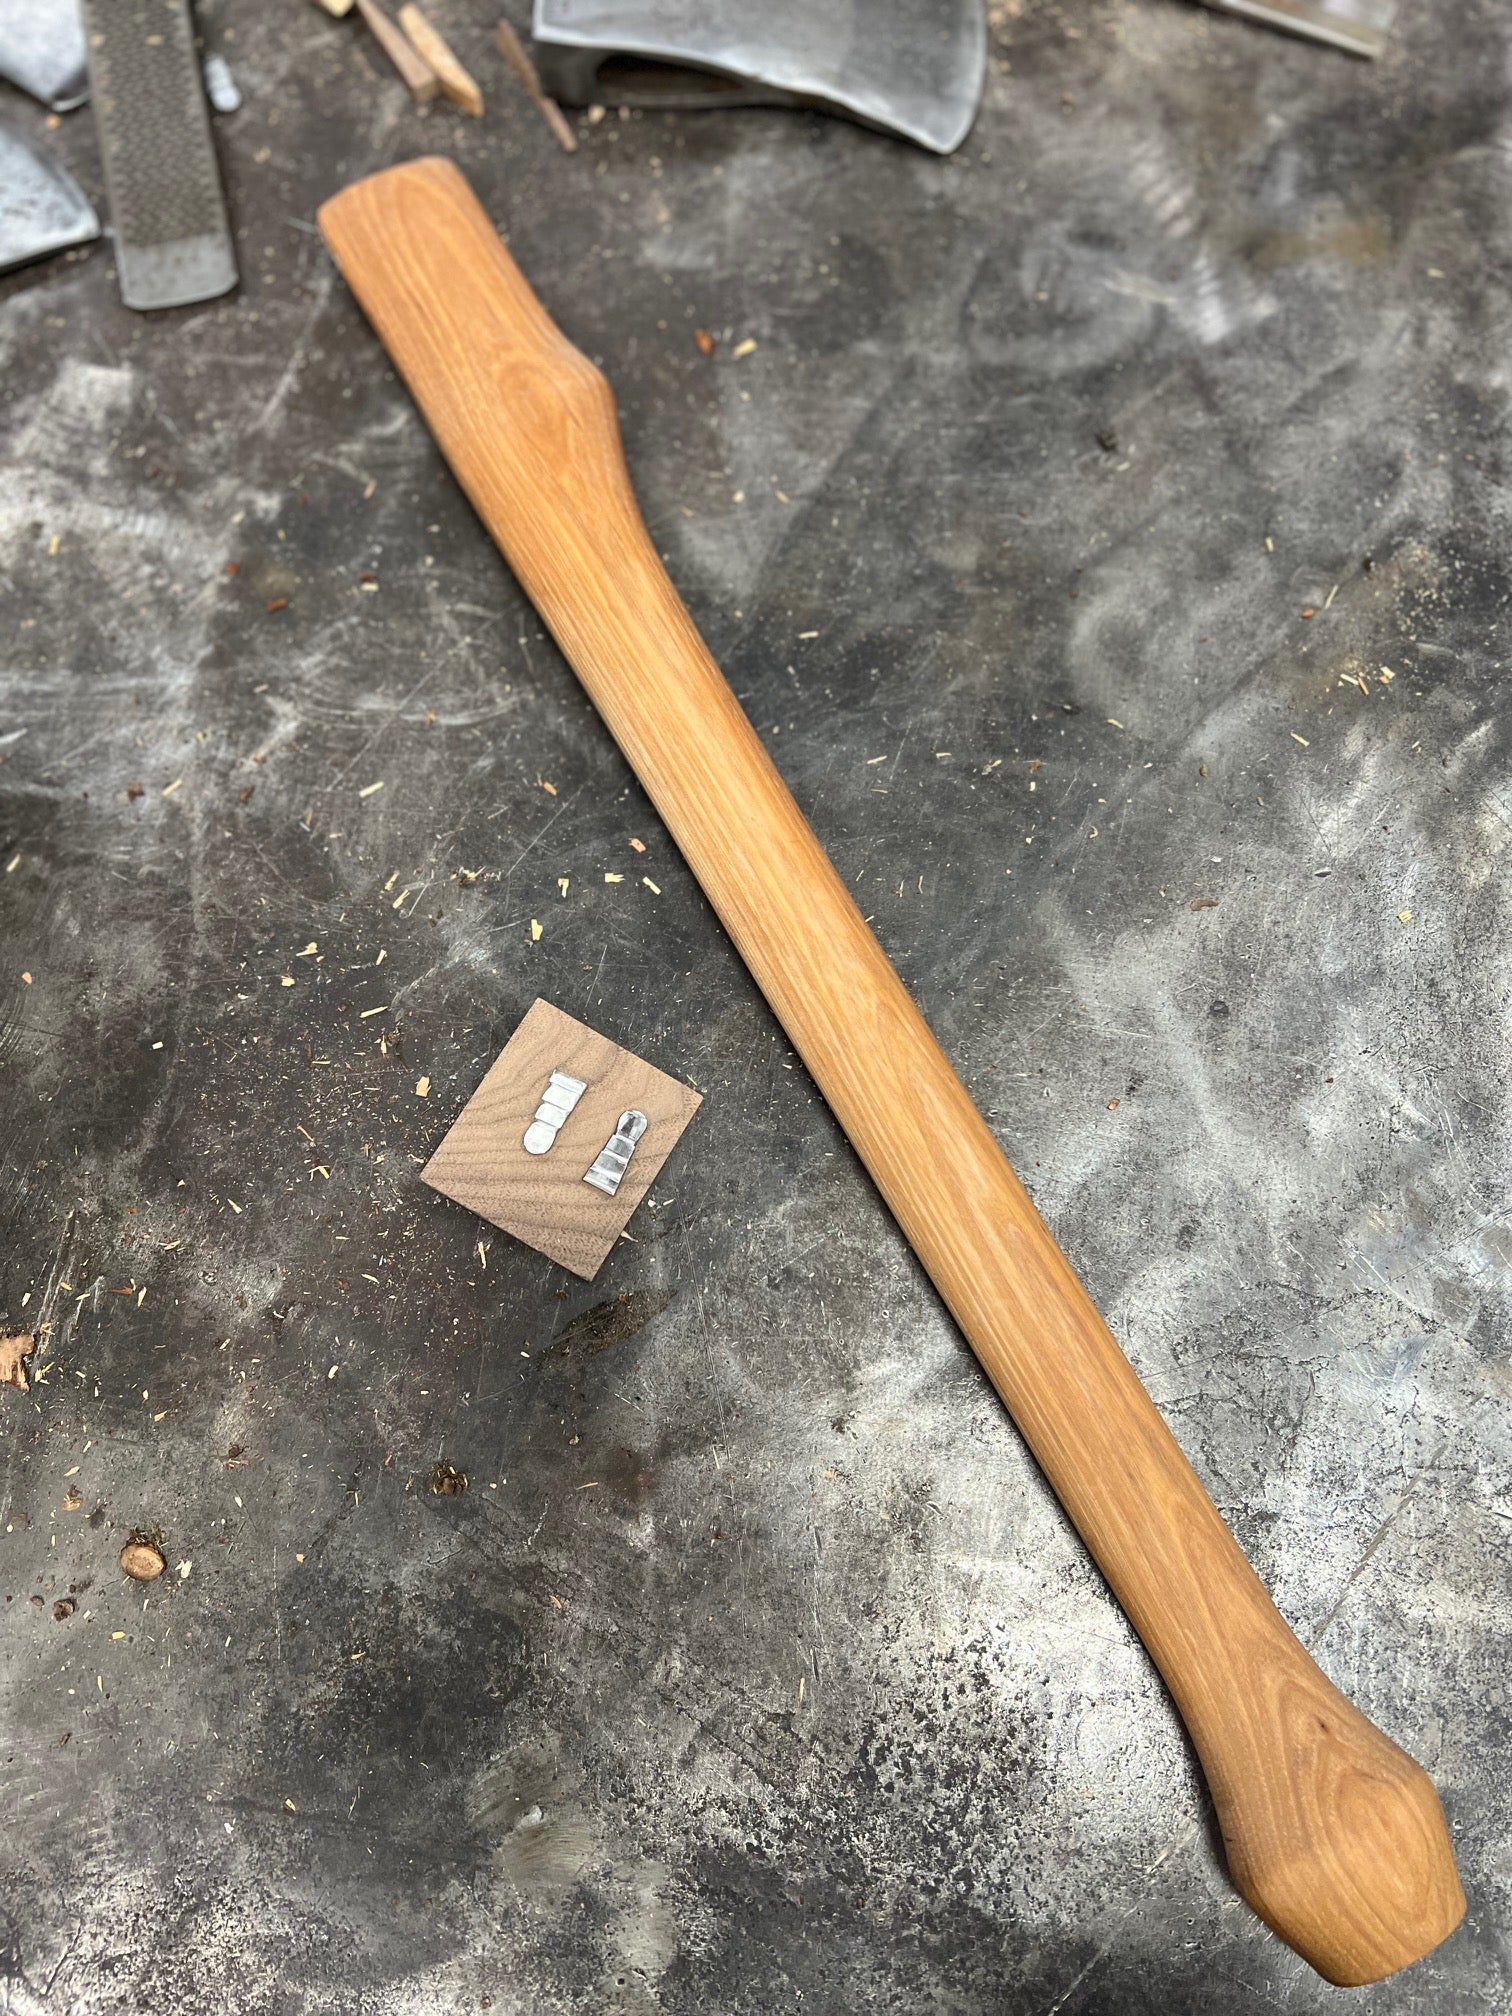 A hickory wood axe handle with textured grip securely fastened to a metal axe head for efficient logging tasks